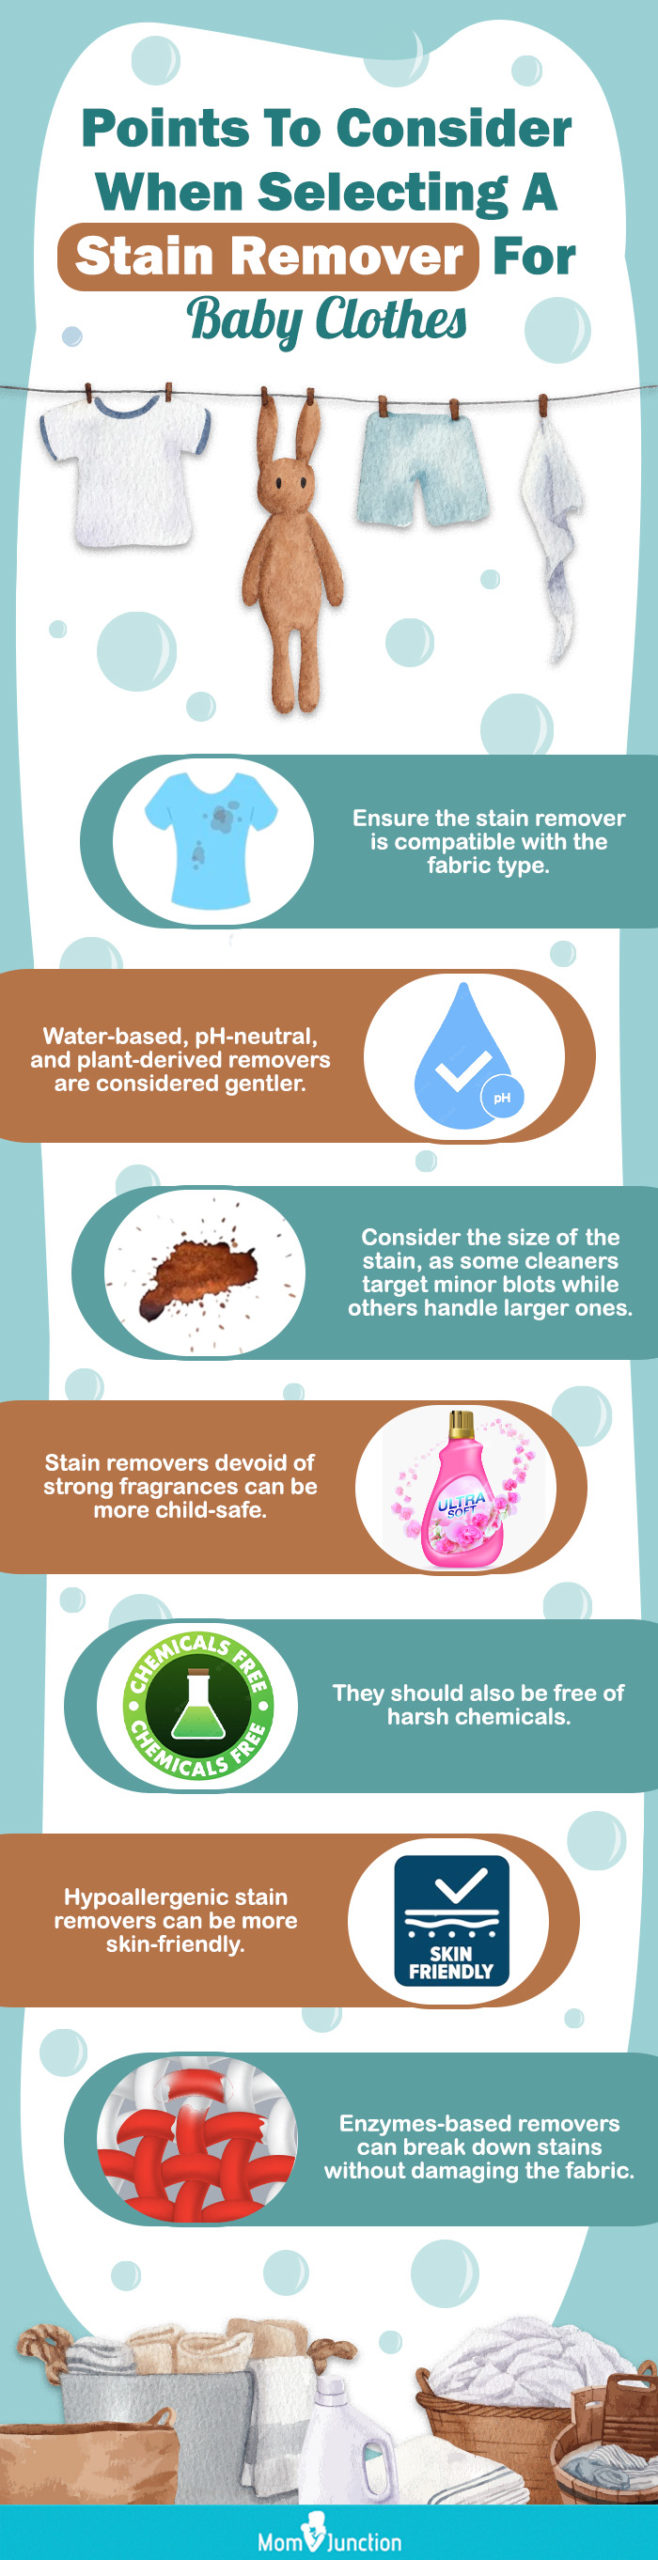 Points To Consider When Selecting A Stain Remover For Baby Clothes